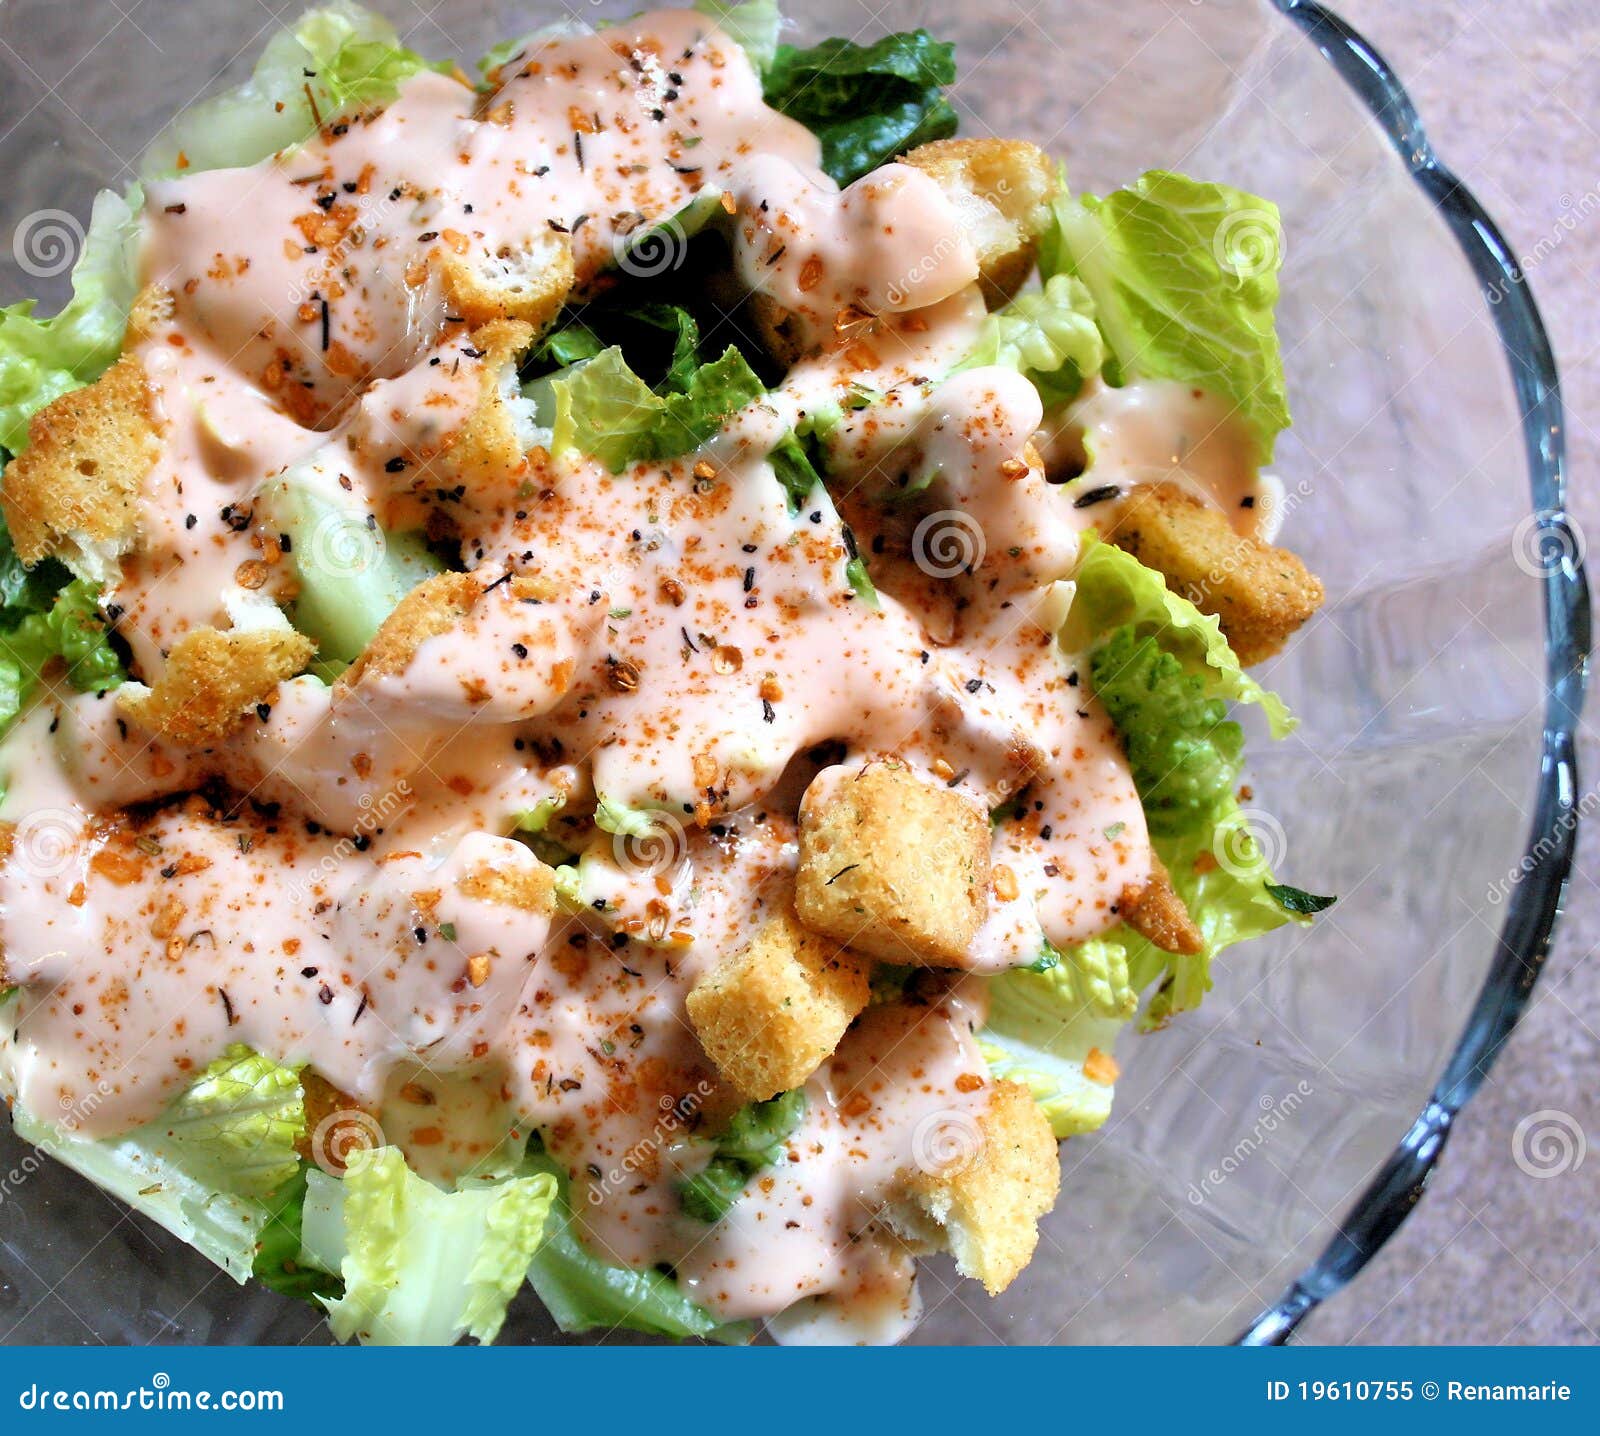 Fresh Salad With Croutons. Delicious garden salad. Romaine lettuce, croutons, salad dressing and flavoured spices.